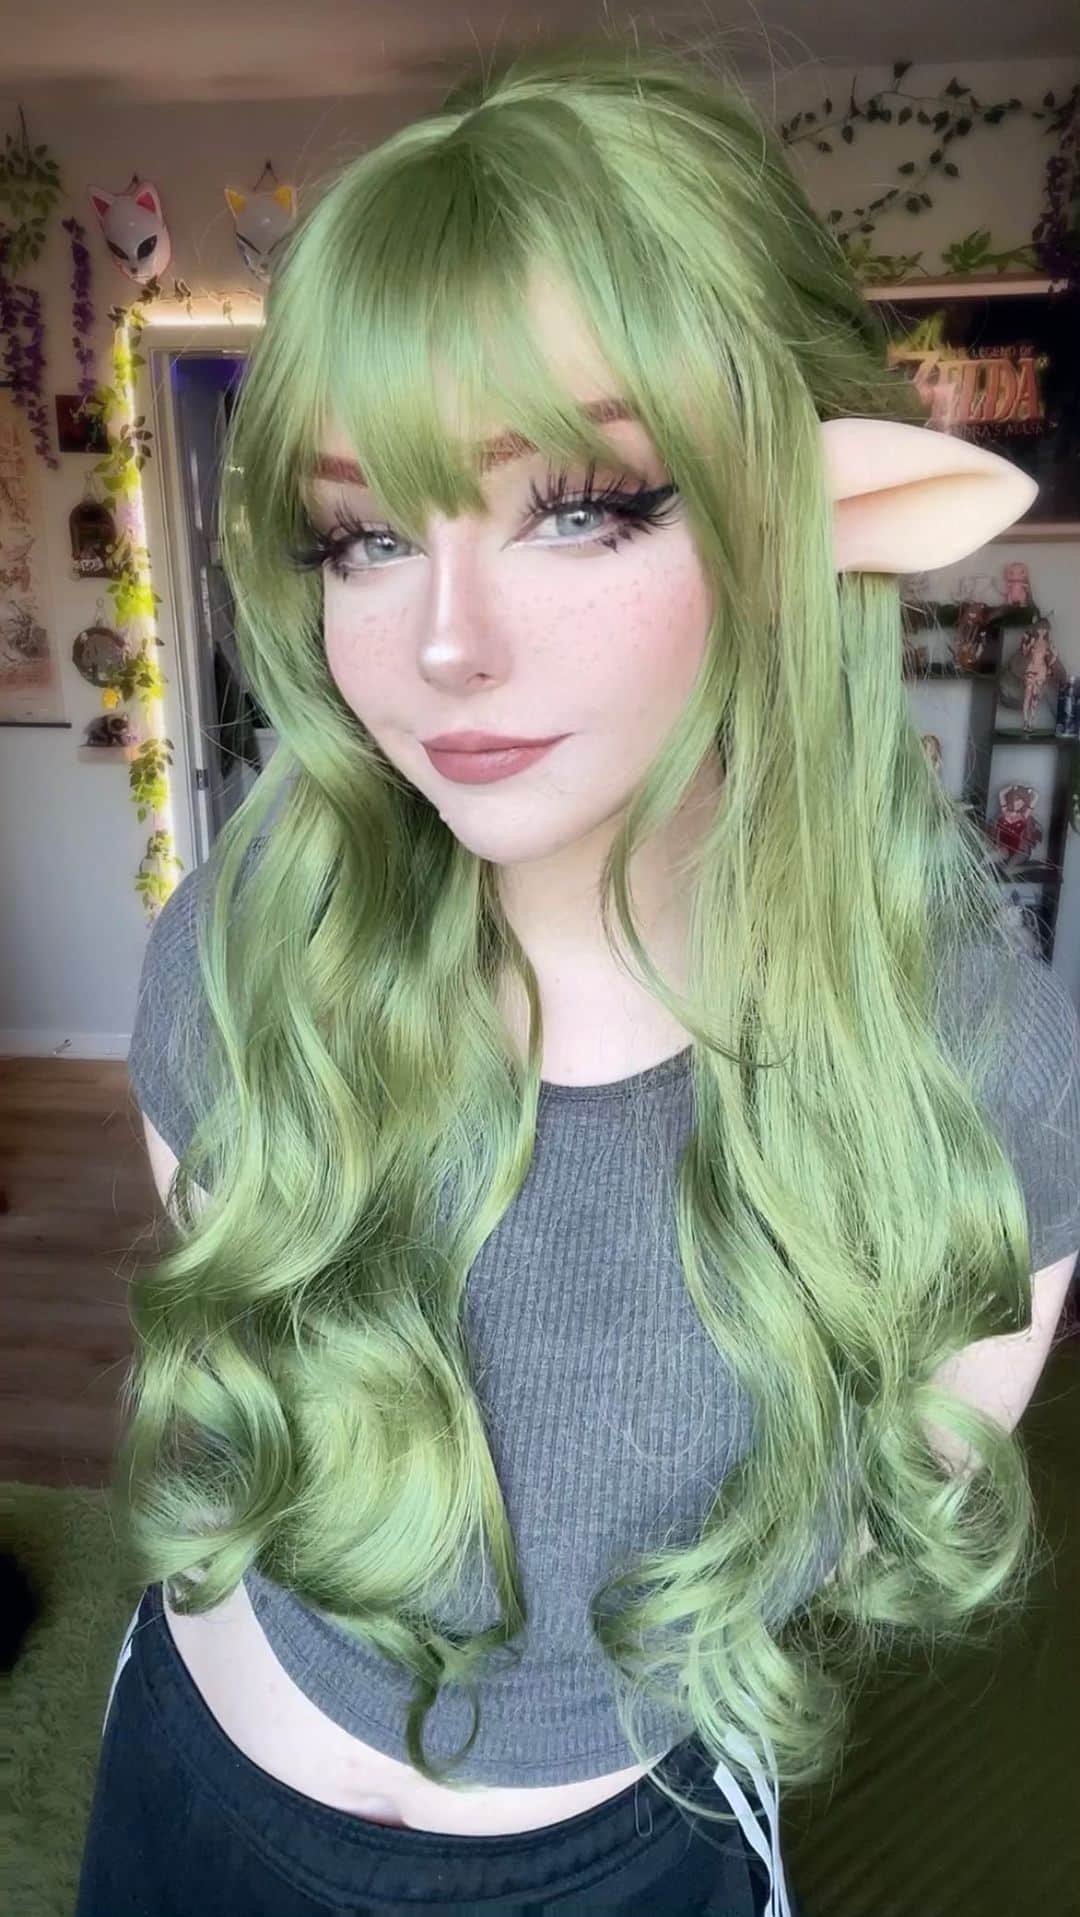 Nicole Eevee Davisのインスタグラム：「I couldn’t decide which I liked better with this wig 🍃🦌 The cat ears are giving Sprigatito vibes but the fawn ears make me feel so whimsical (Cat ears were made by @collardollz and the faun ears were by @elven.caravan )」